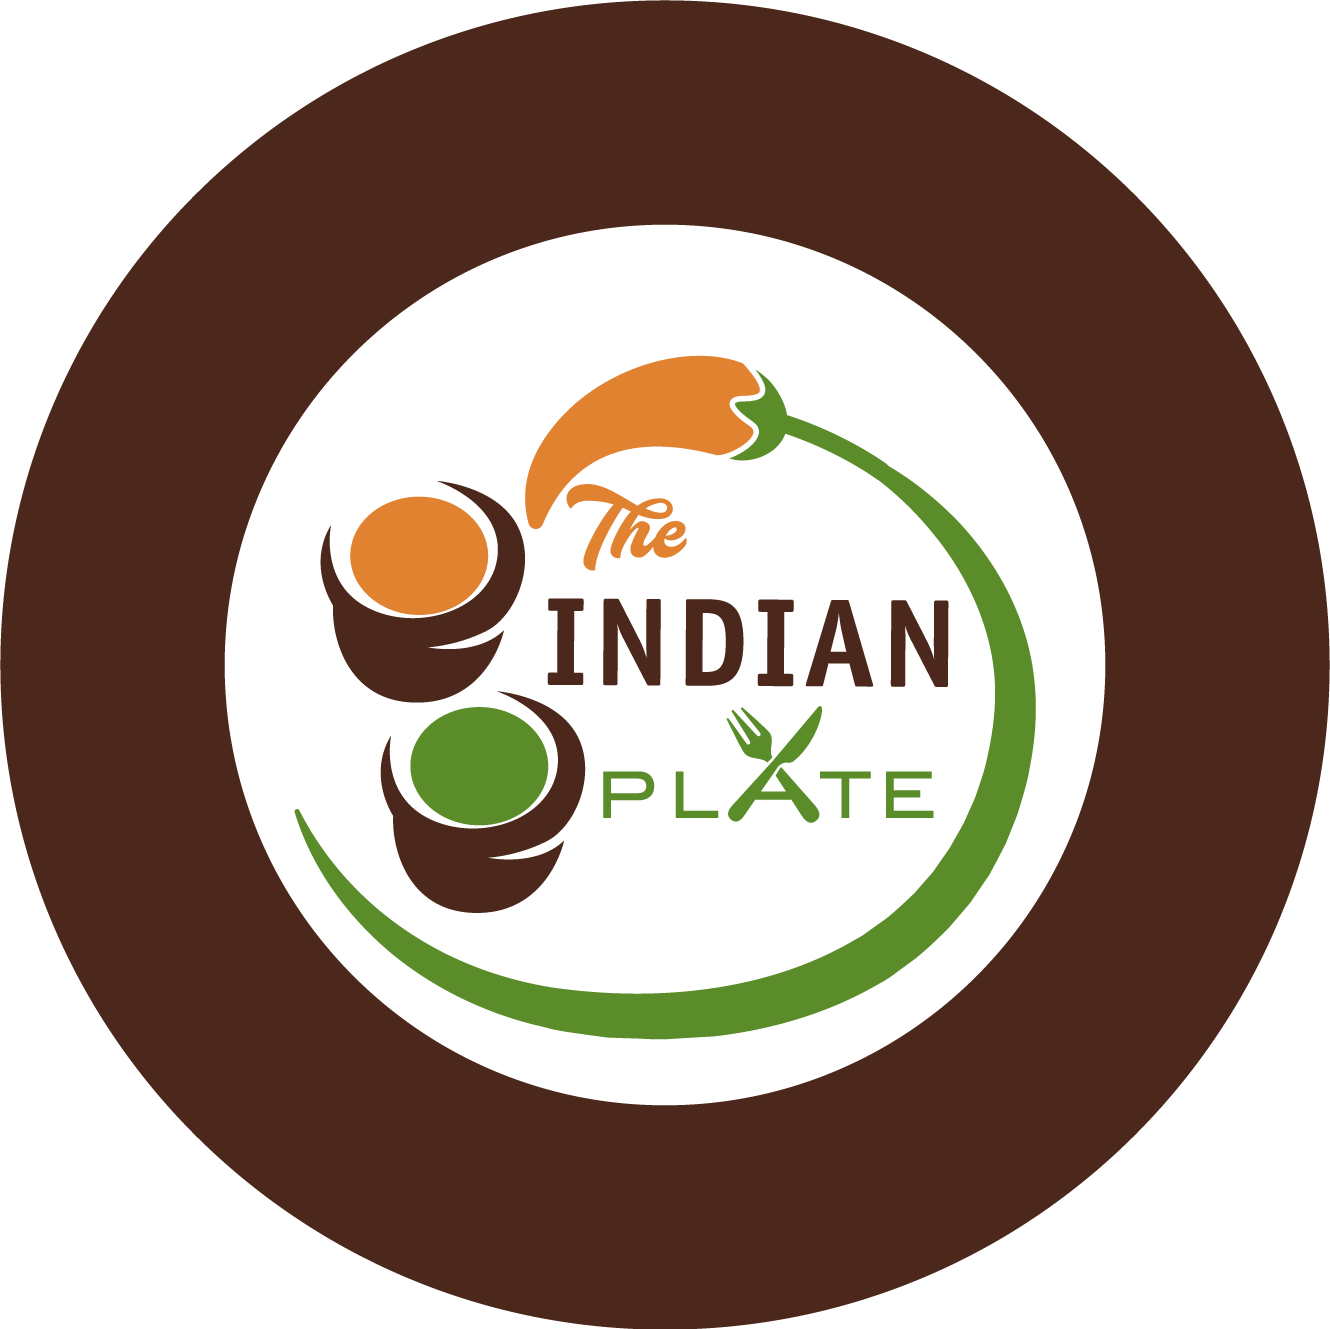 The Indian Plate